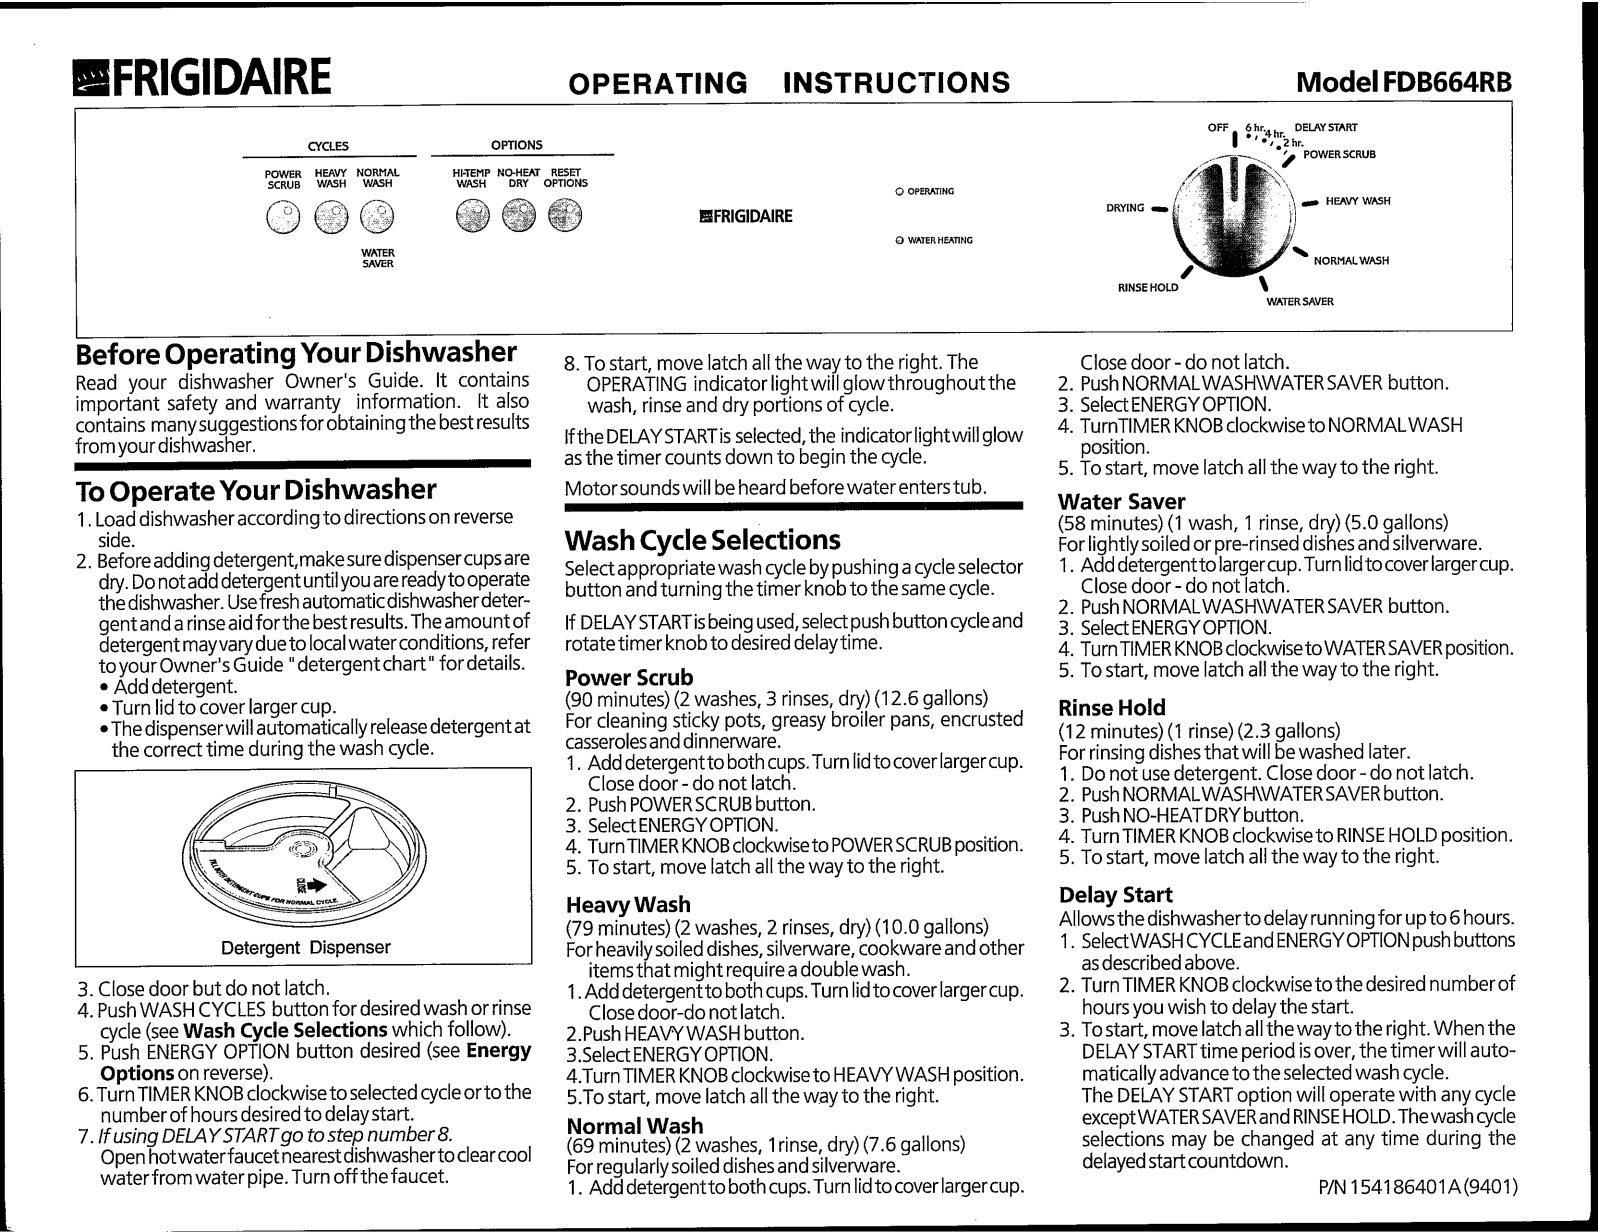 Frigidaire FDB664RB Owner's Guide